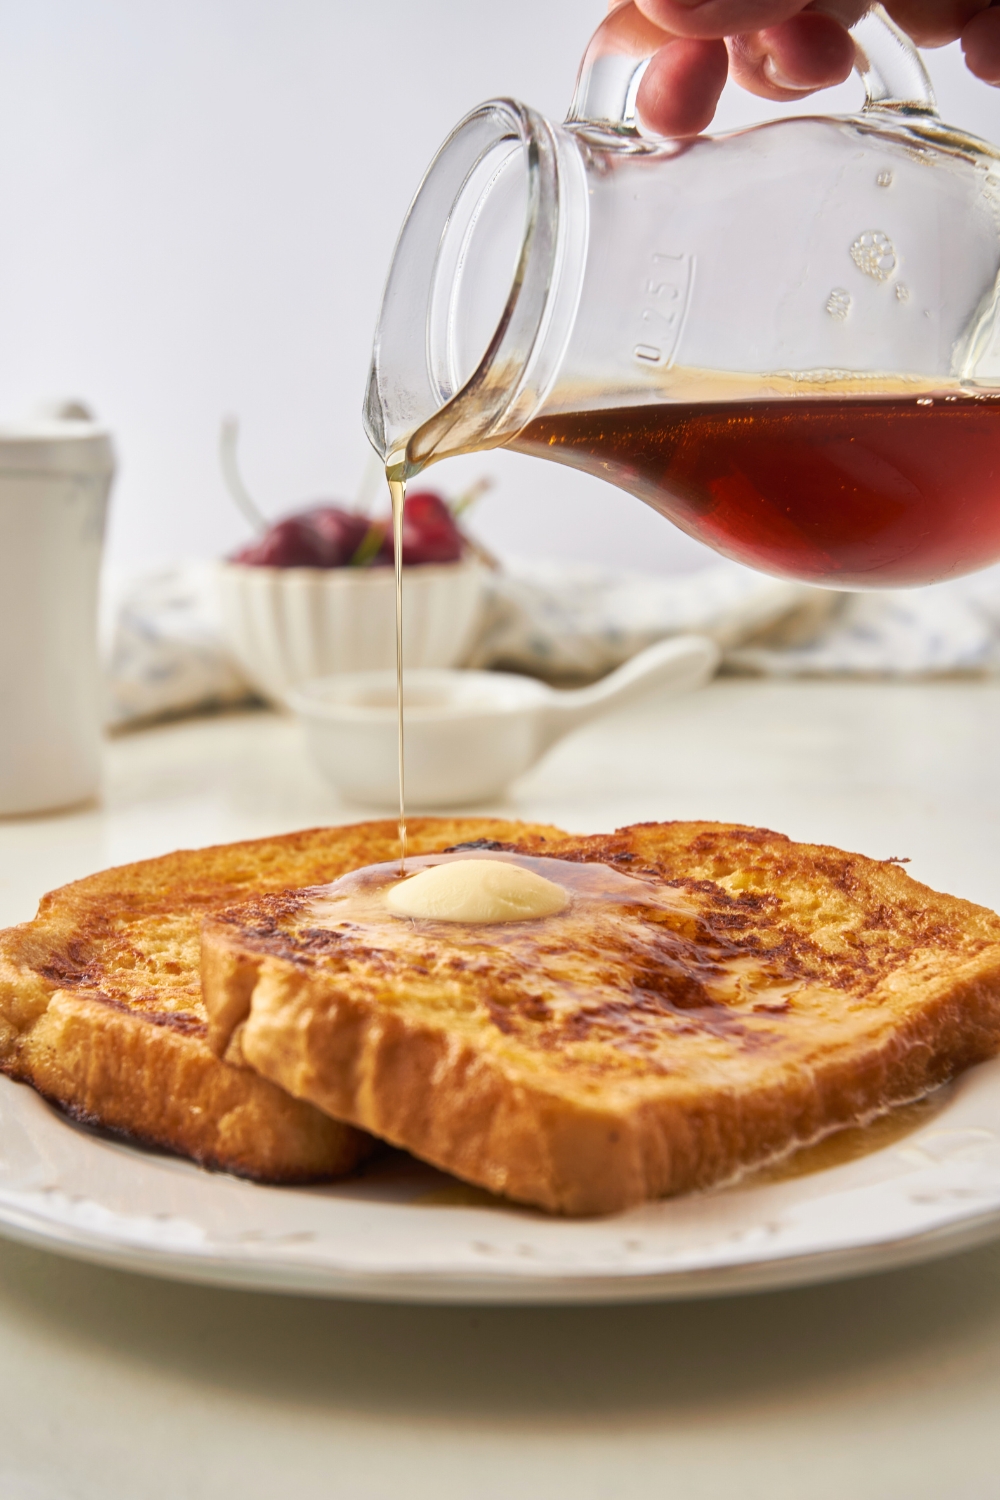 A hand pouring a pitcher of syrup on top of a slice of french toast on a white plate.